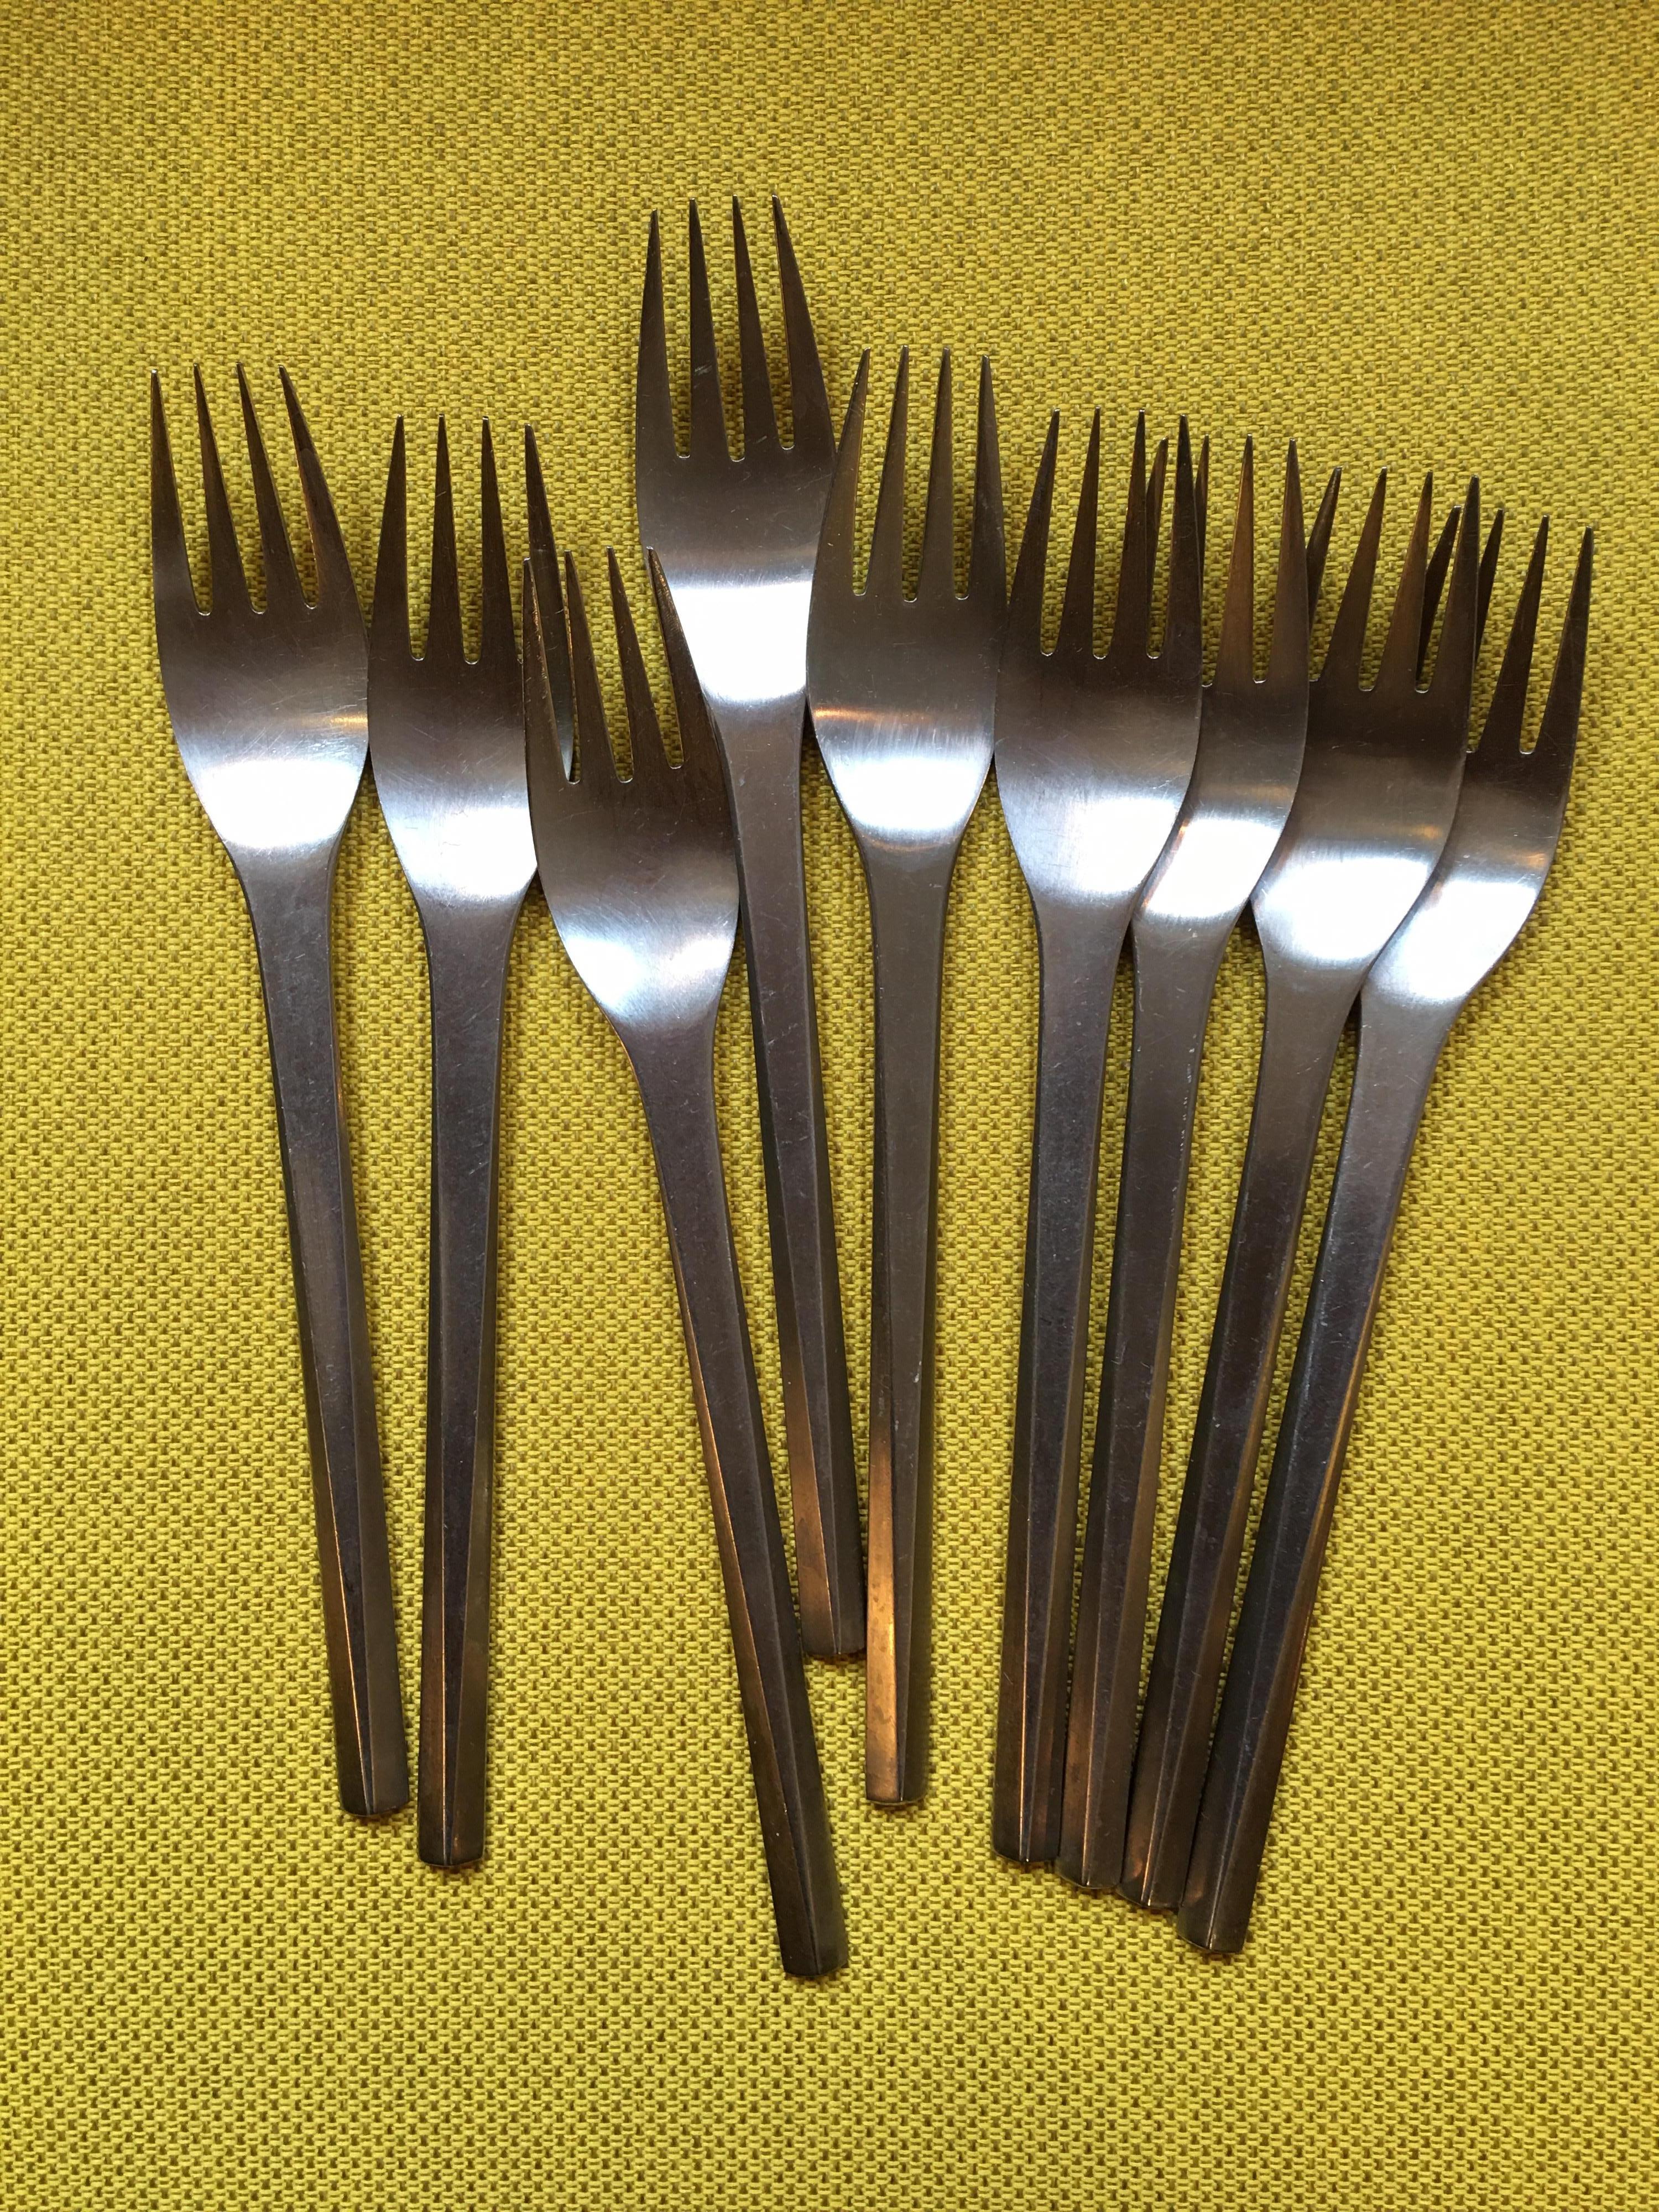 Mid-20th Century Georg Jensen Prism Stainless Flatware Service for 8